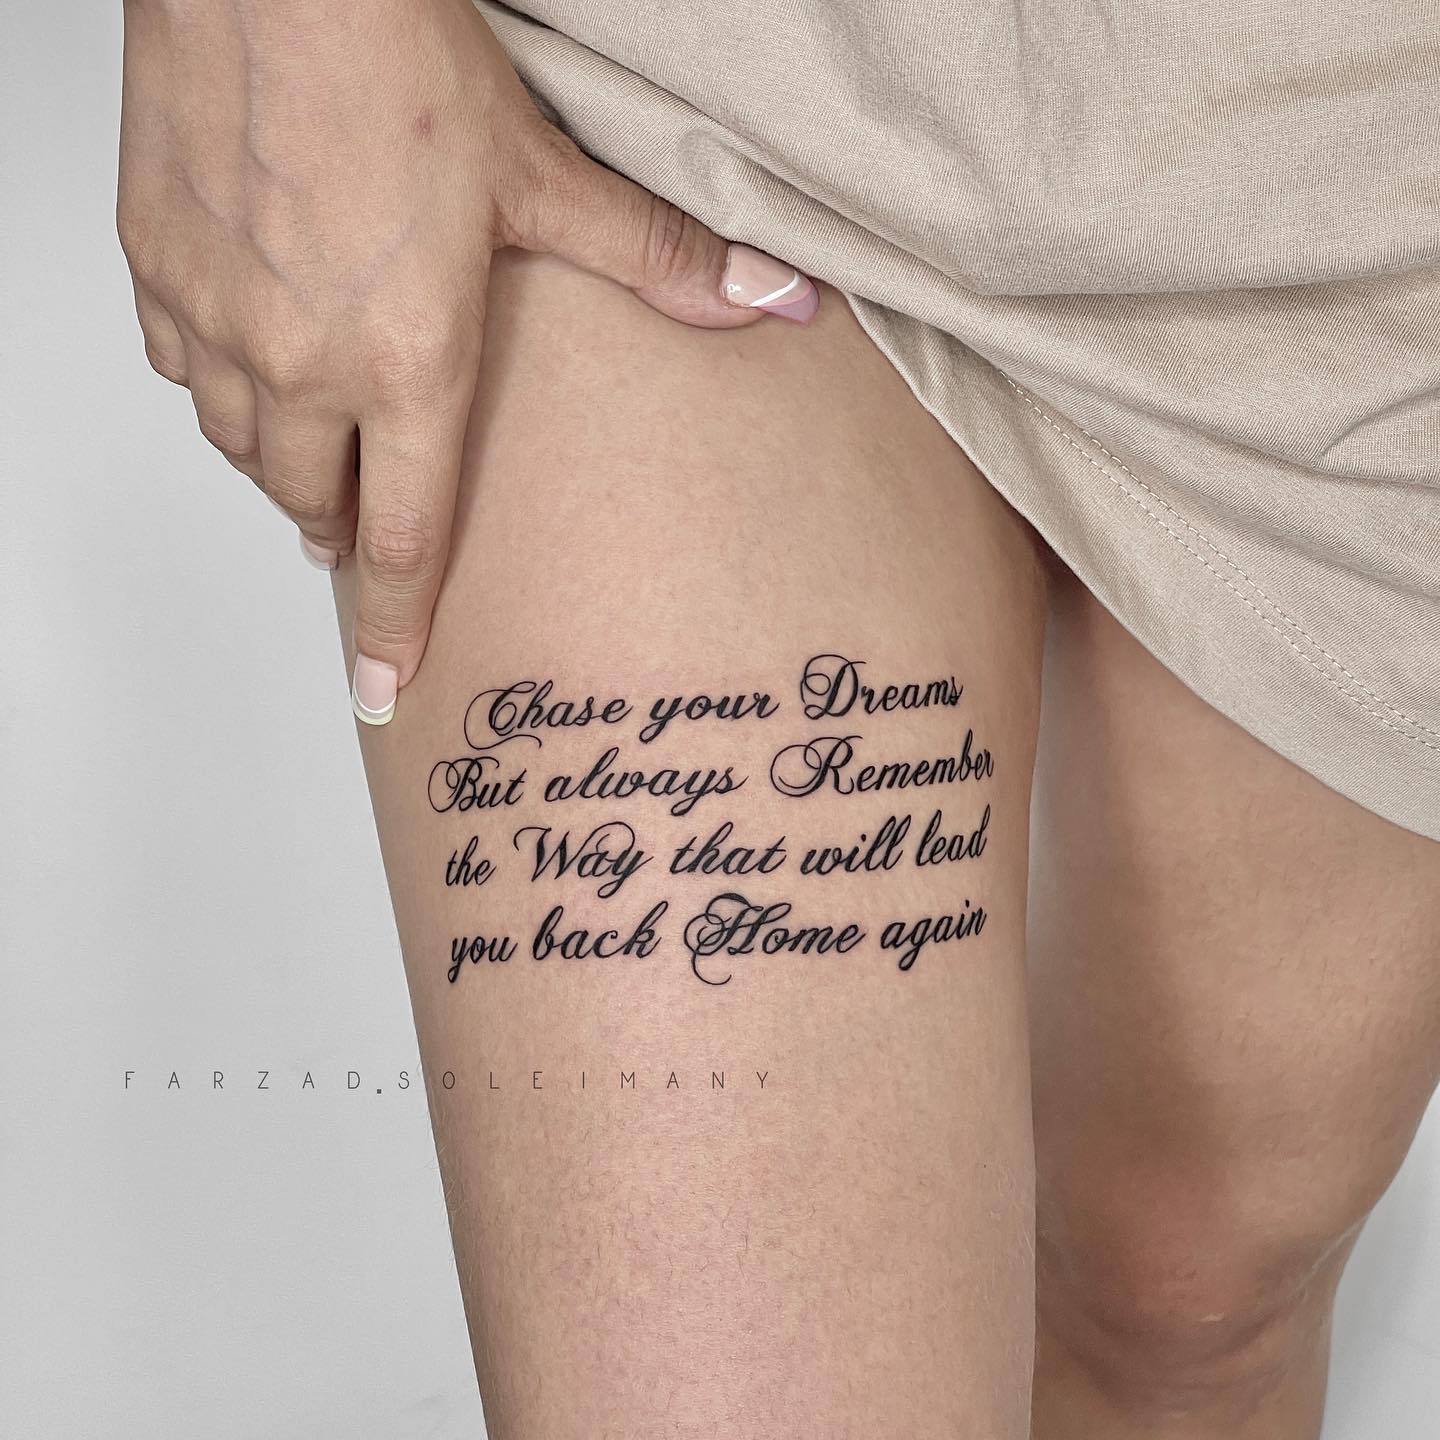 Where to Tattoo a Quote  Sleight of Hand